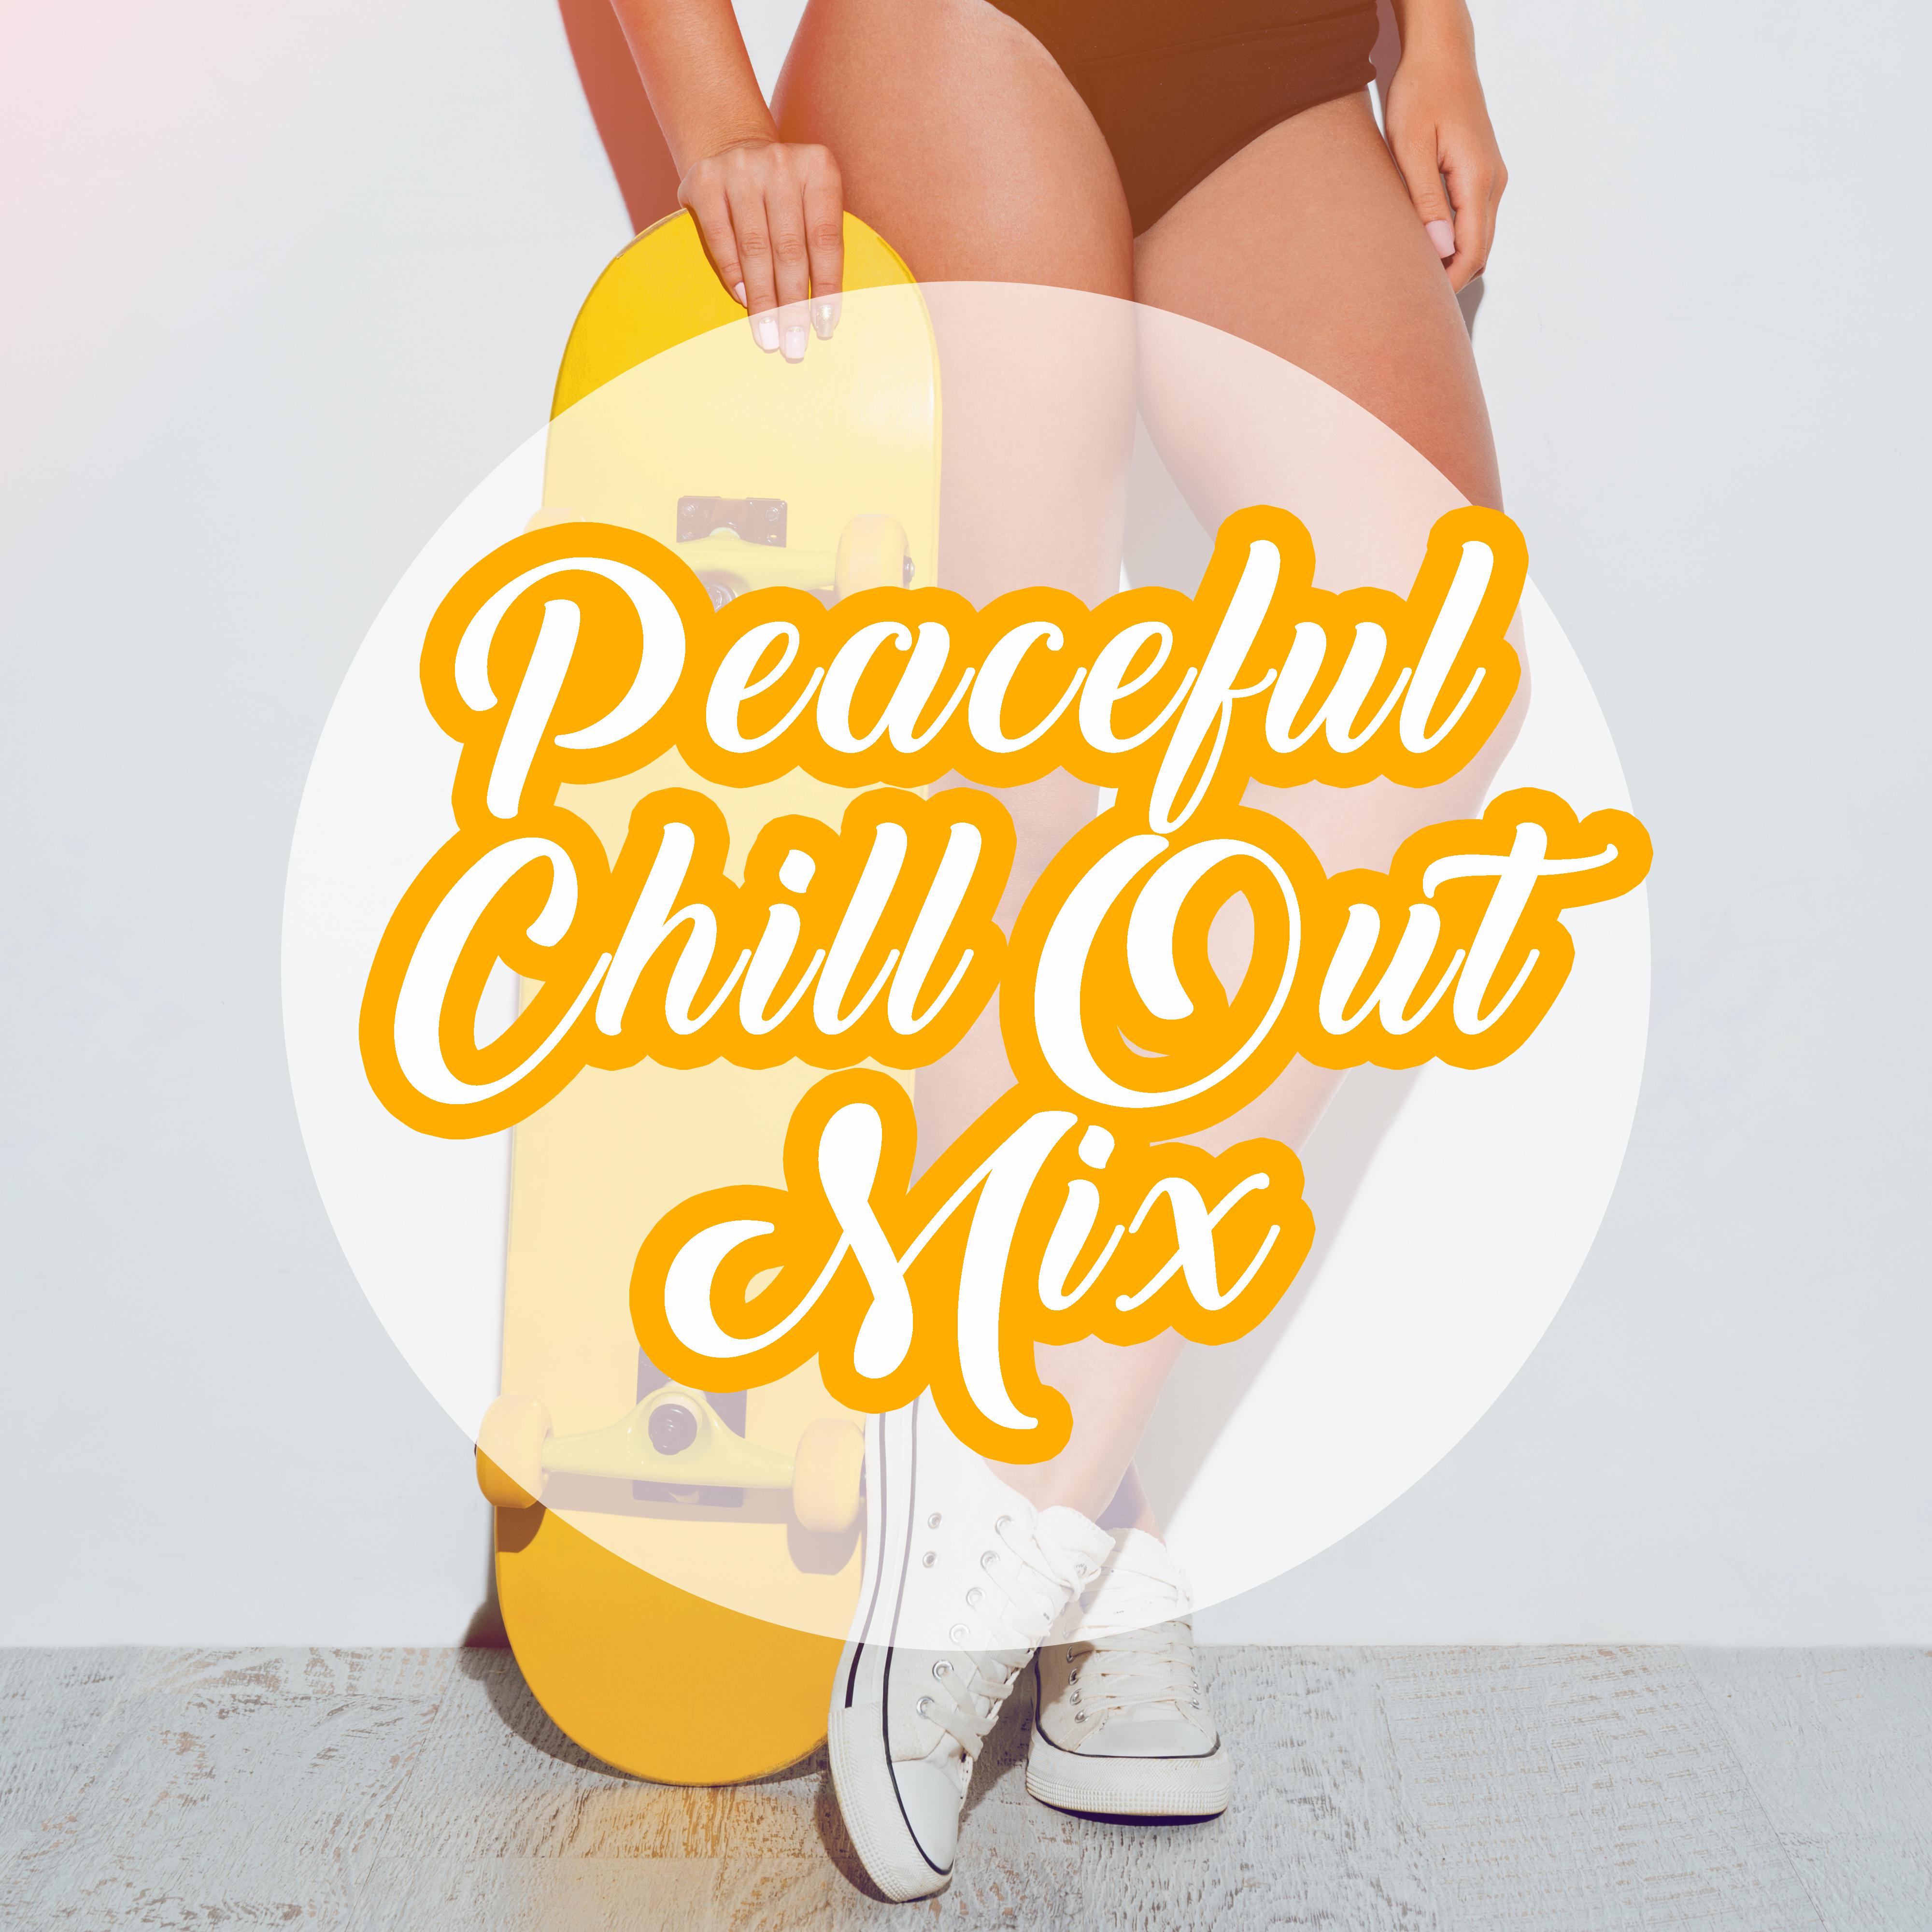 Peaceful Chill Out Mix  Summer Music, Relaxing Sounds, Calming Beach Melodies, Stress Free